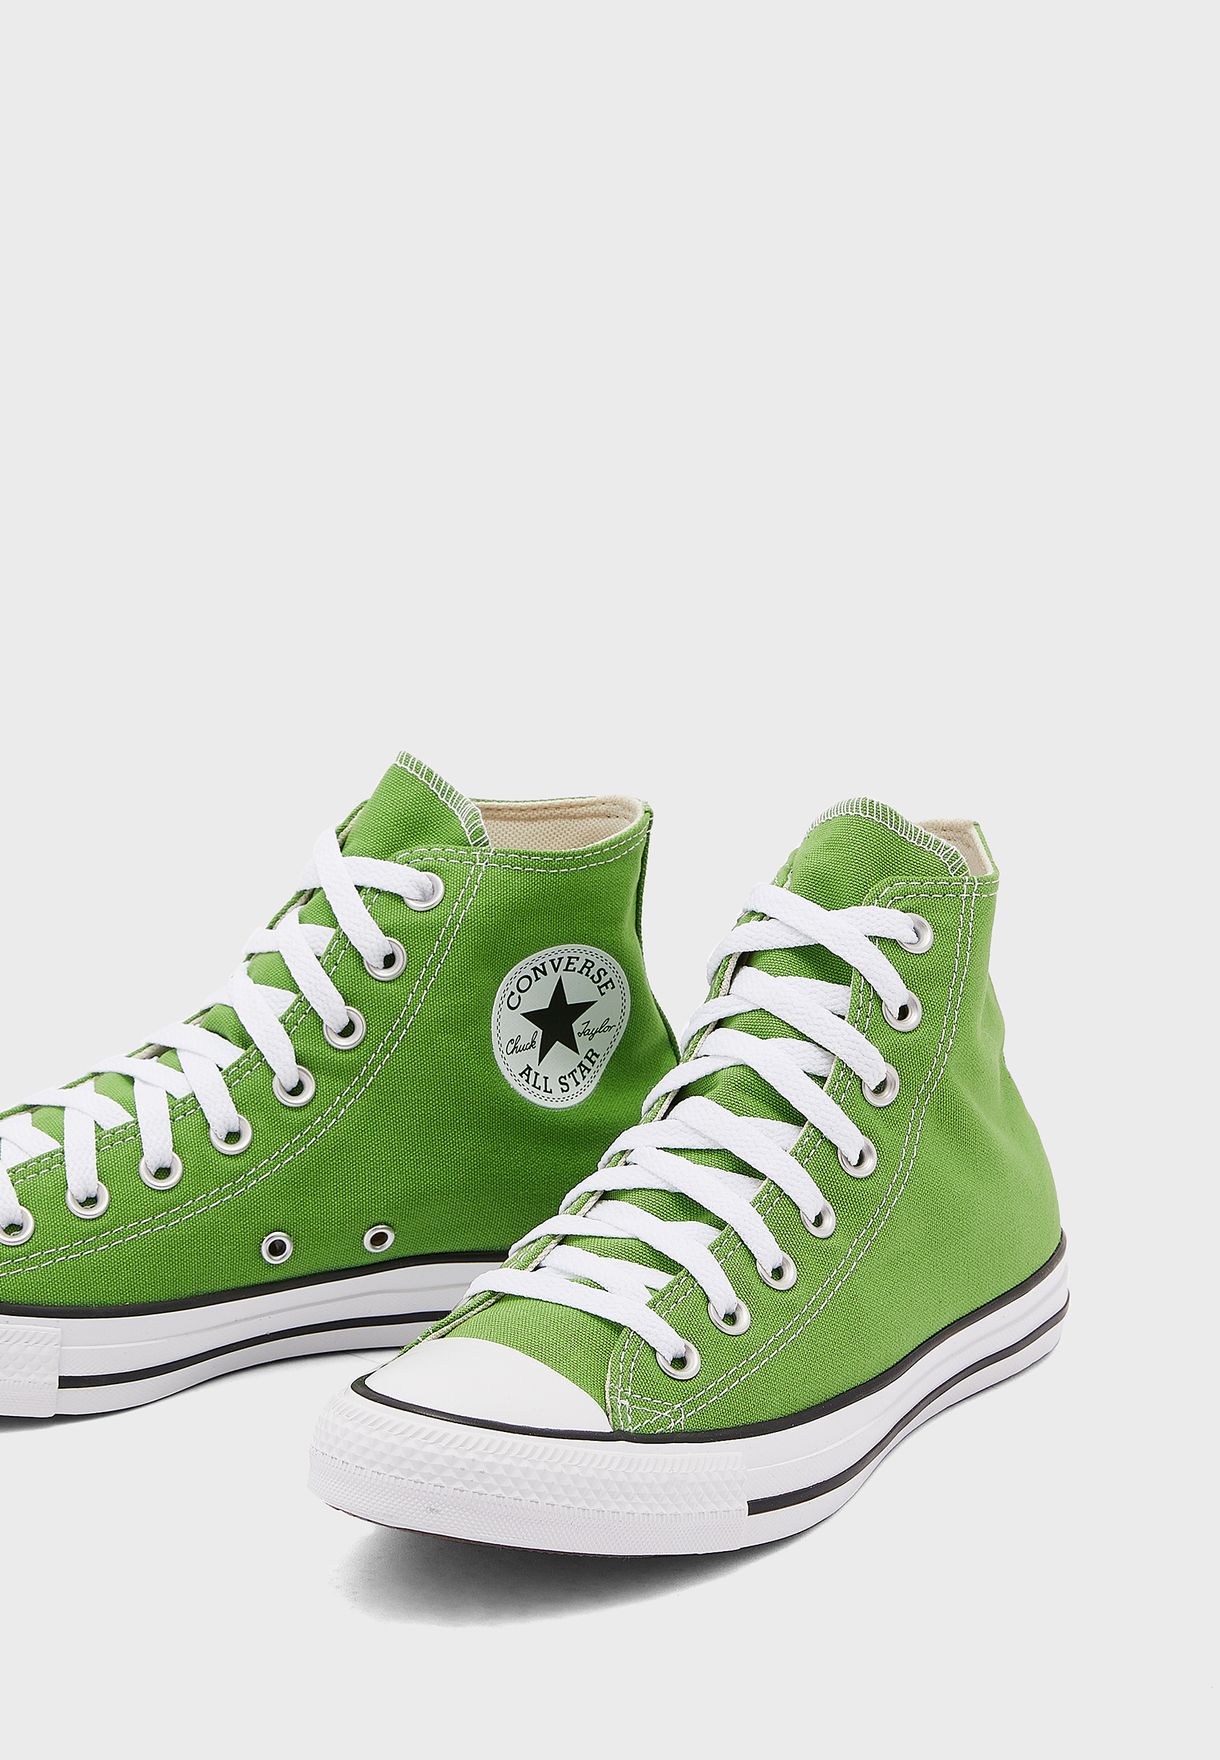 Unisex Chuck Taylor All Star Sneakers